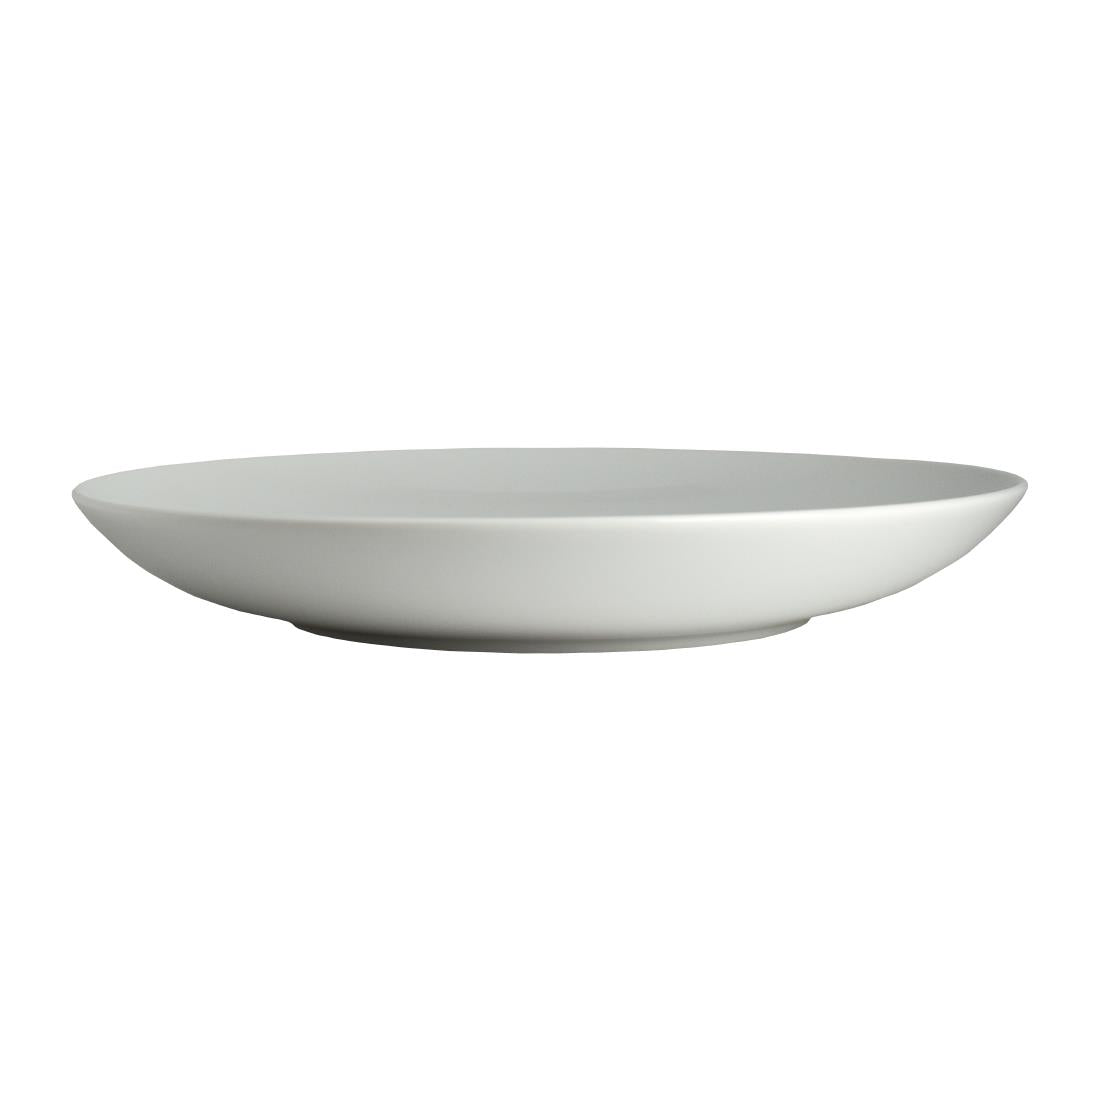 VV3713 Steelite Essence Low Coupe Bowls 286x41mm (Pack of 12)